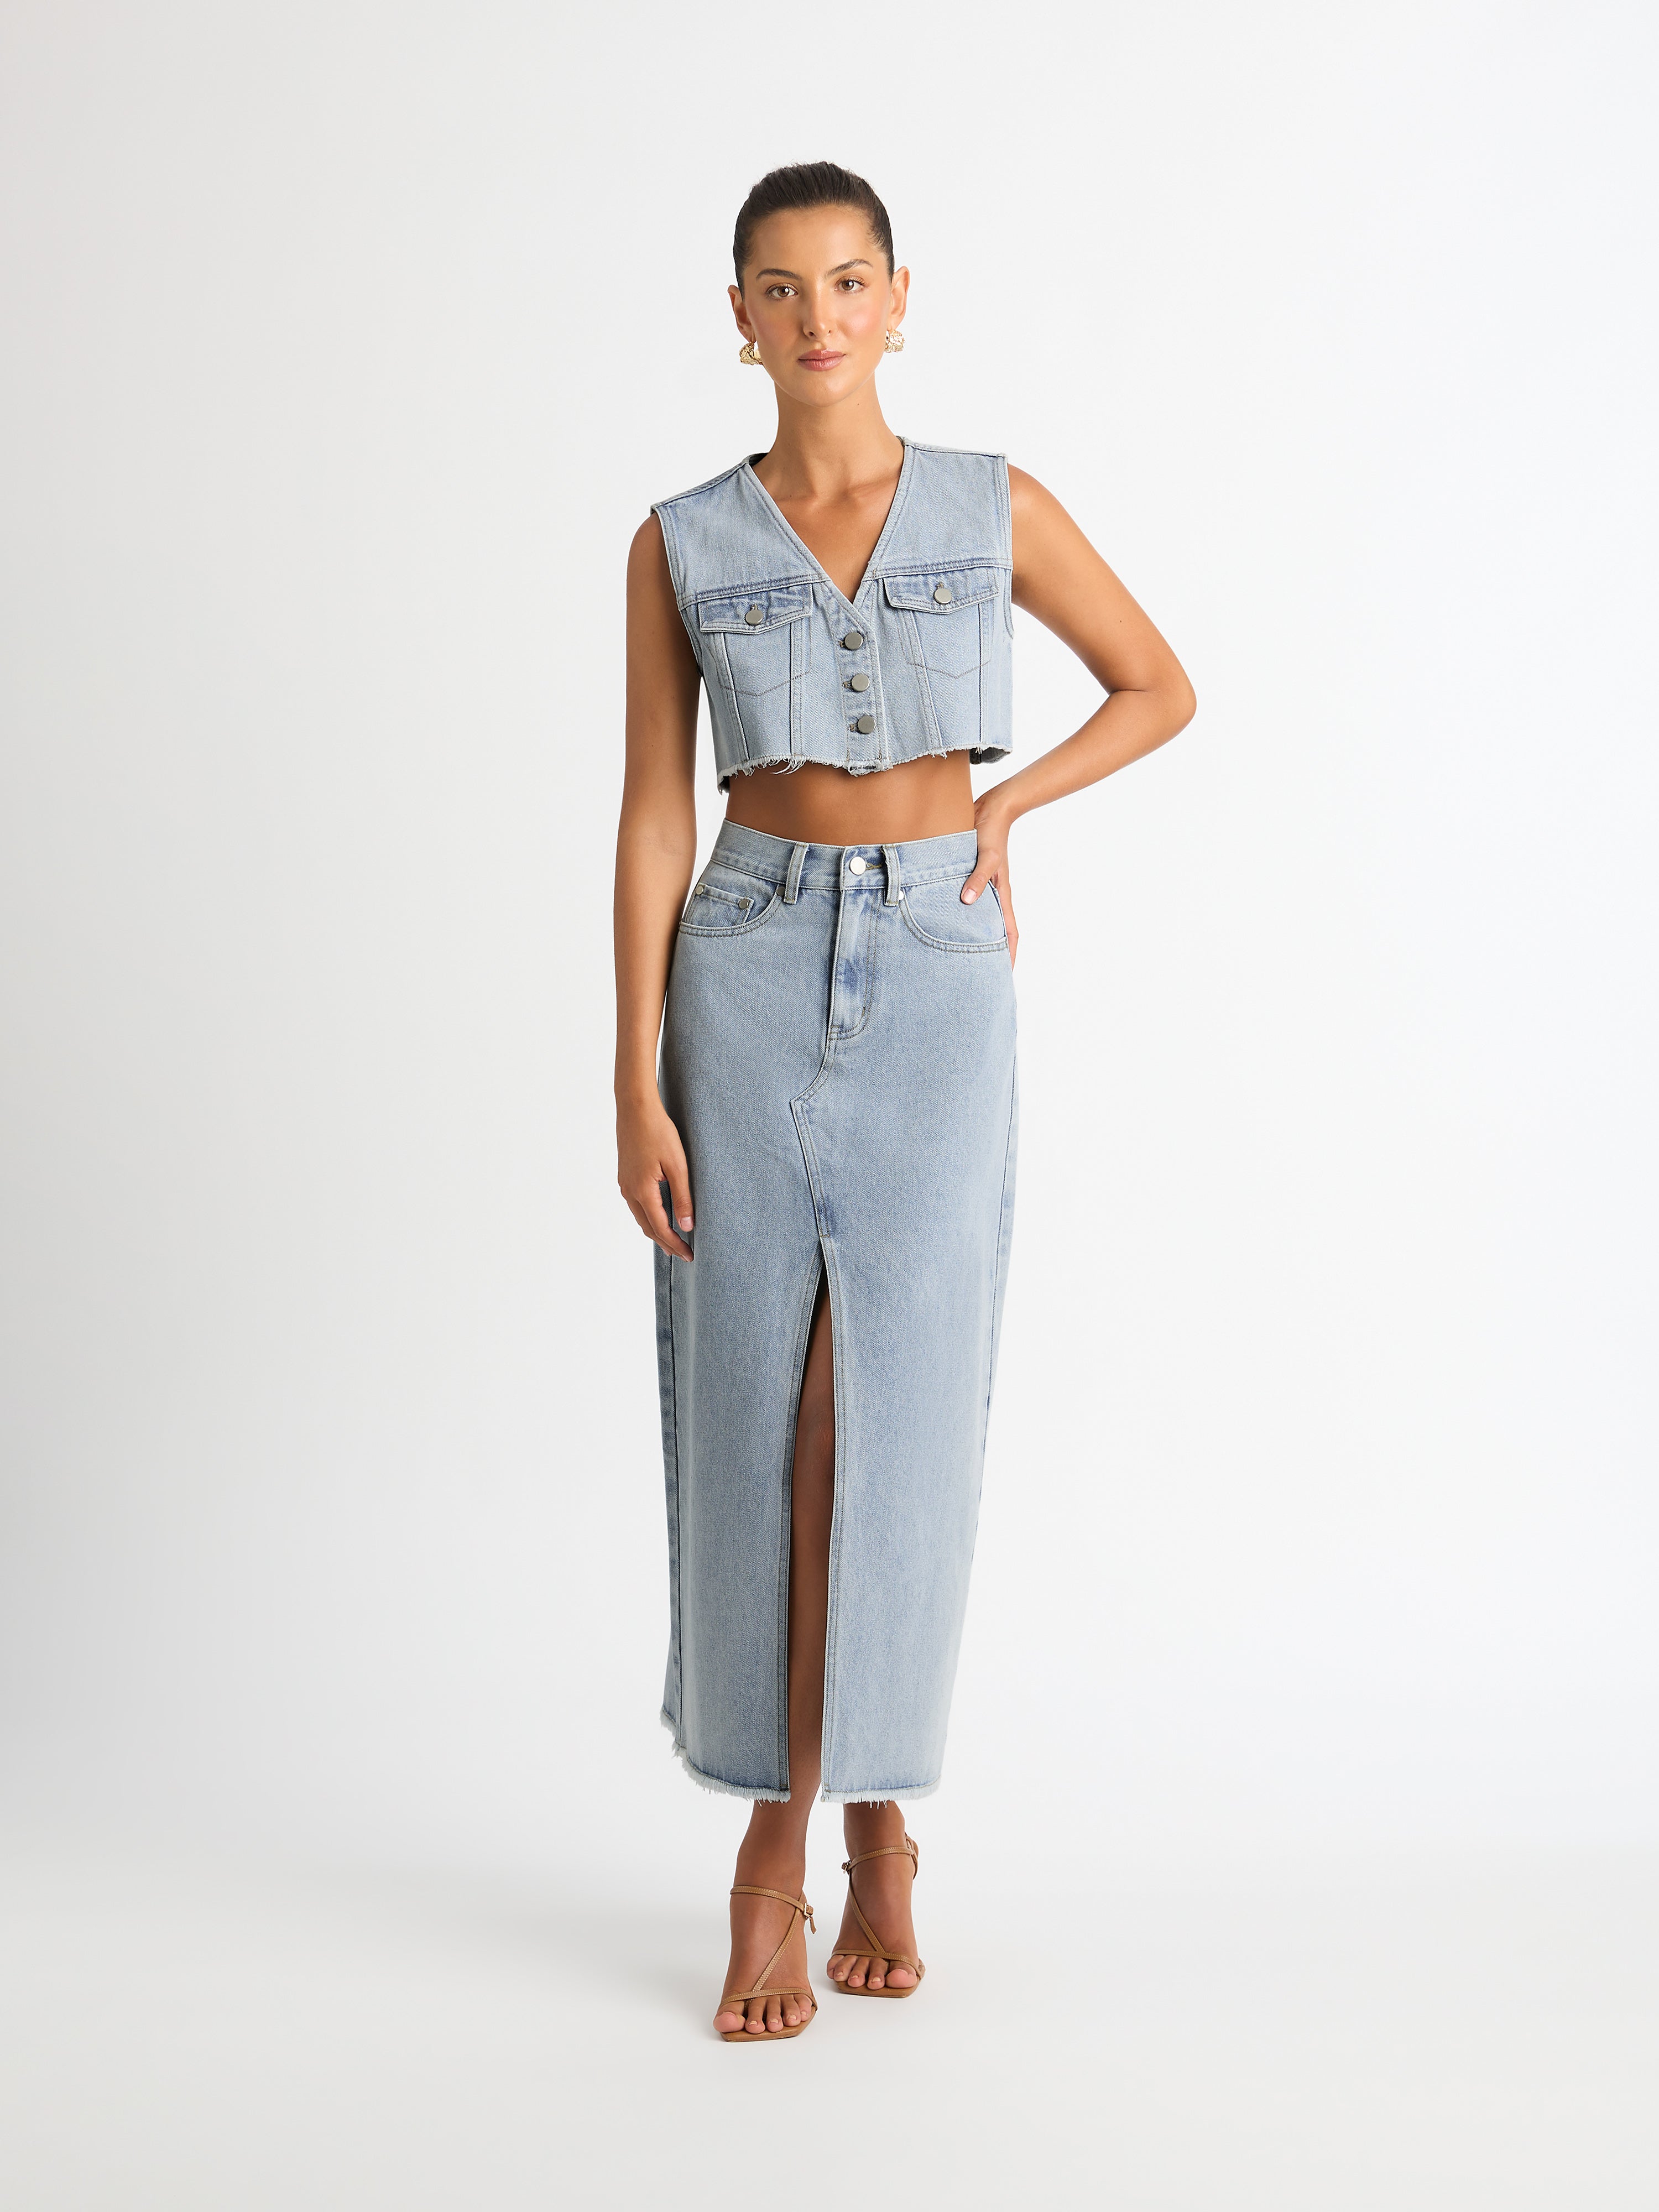 New Look shoppers love £32 'flattering' denim skirt 'ideal for summer and  autumn' in 4 colours - MyLondon